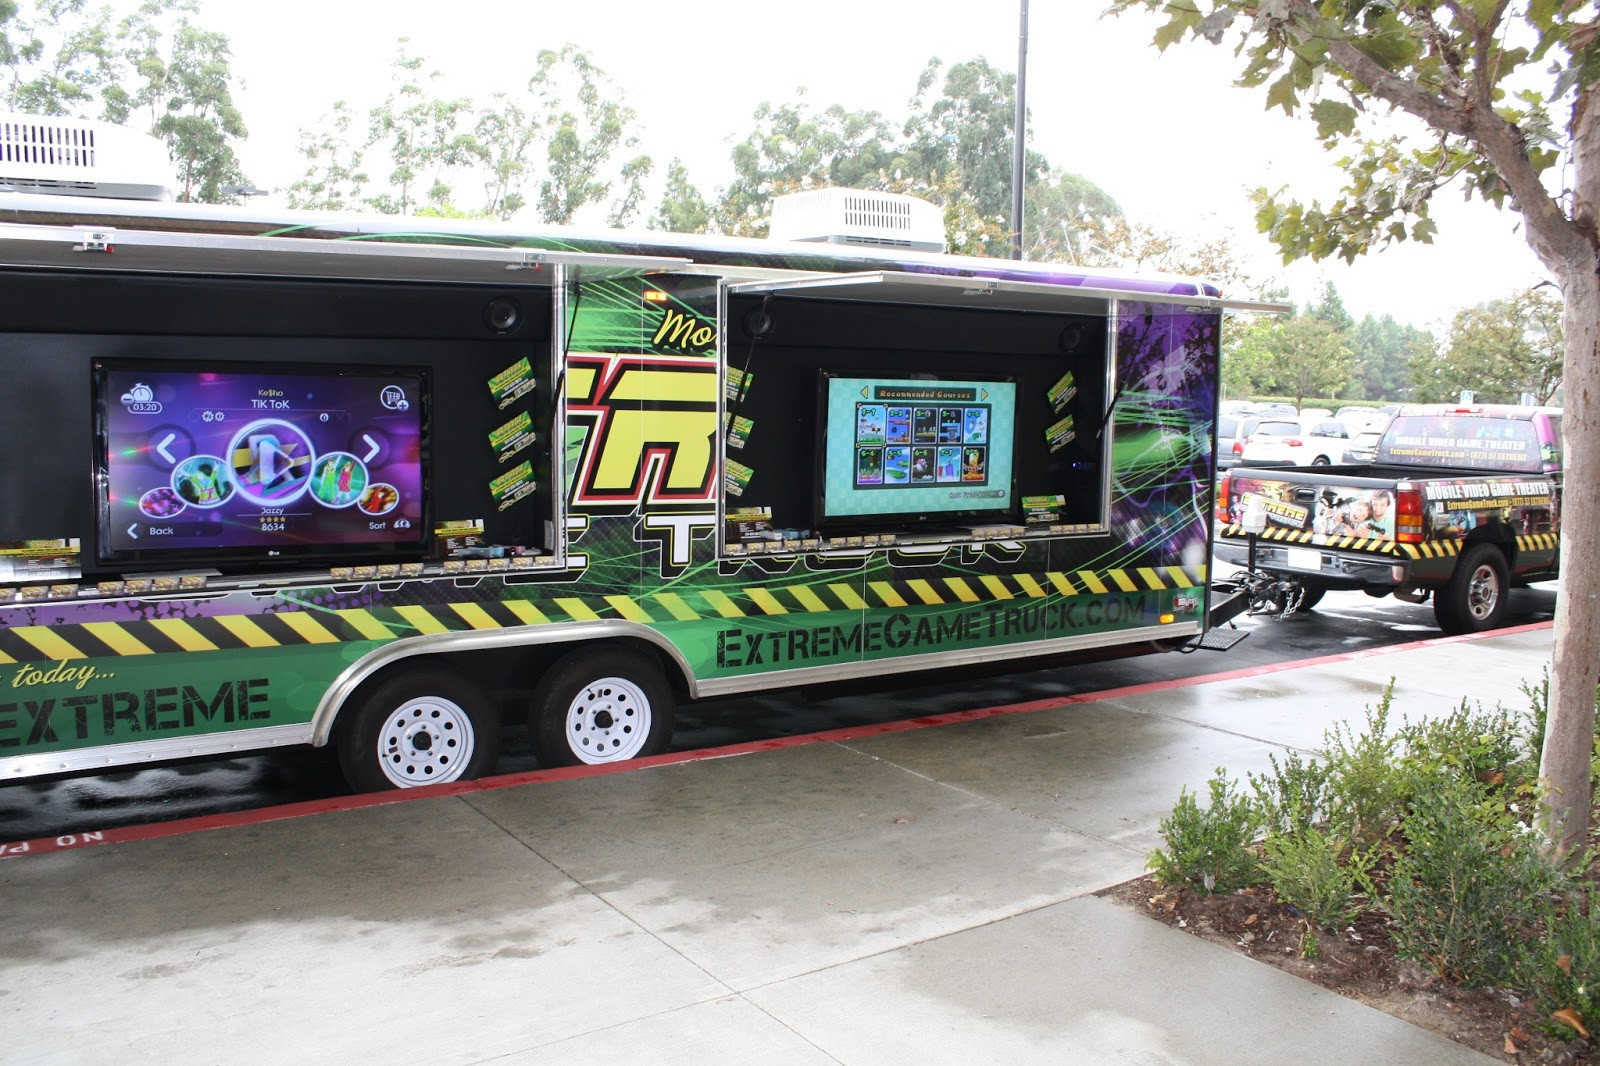 Video Game Truck Birthday Party
 Polkadots on Parade Extreme Game Truck Birthday Party He